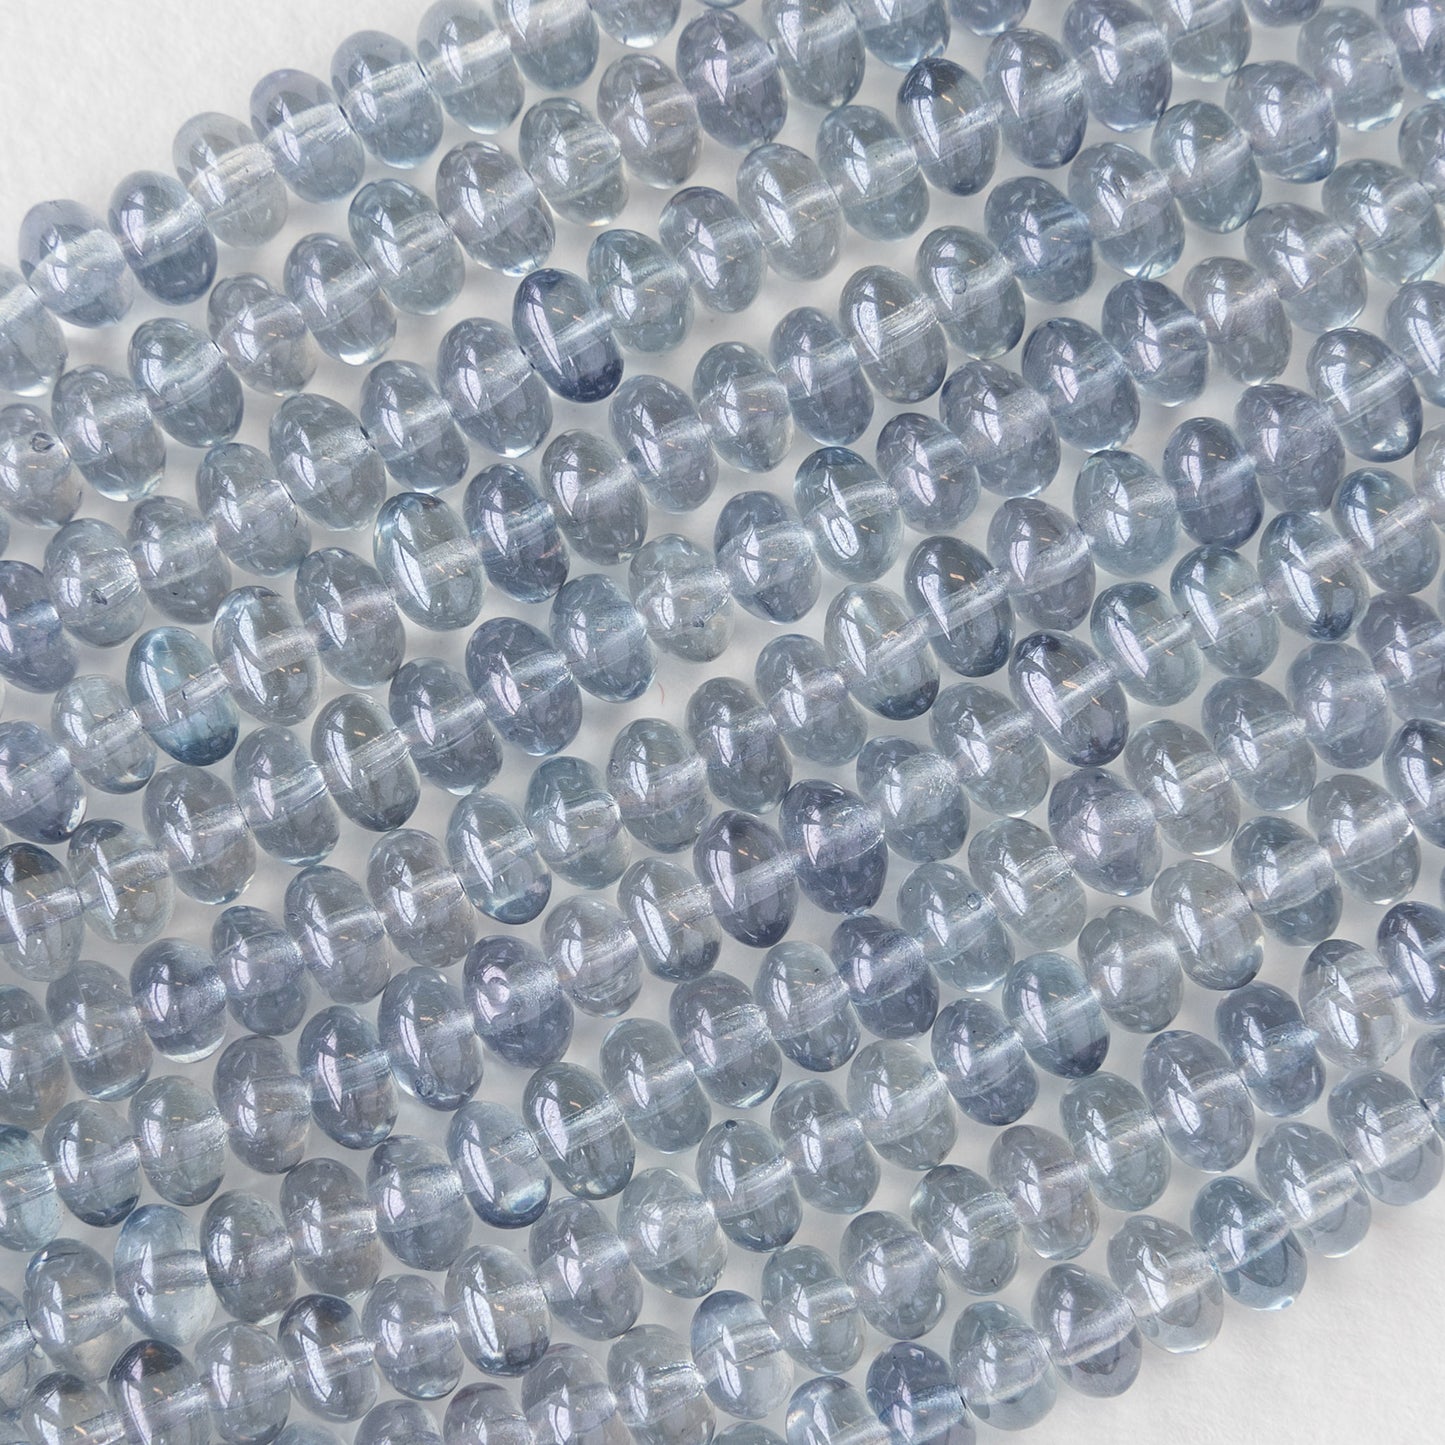 Load image into Gallery viewer, 6mm Rondelle Nugget Beads - Light Blue Luster - 50 Beads
